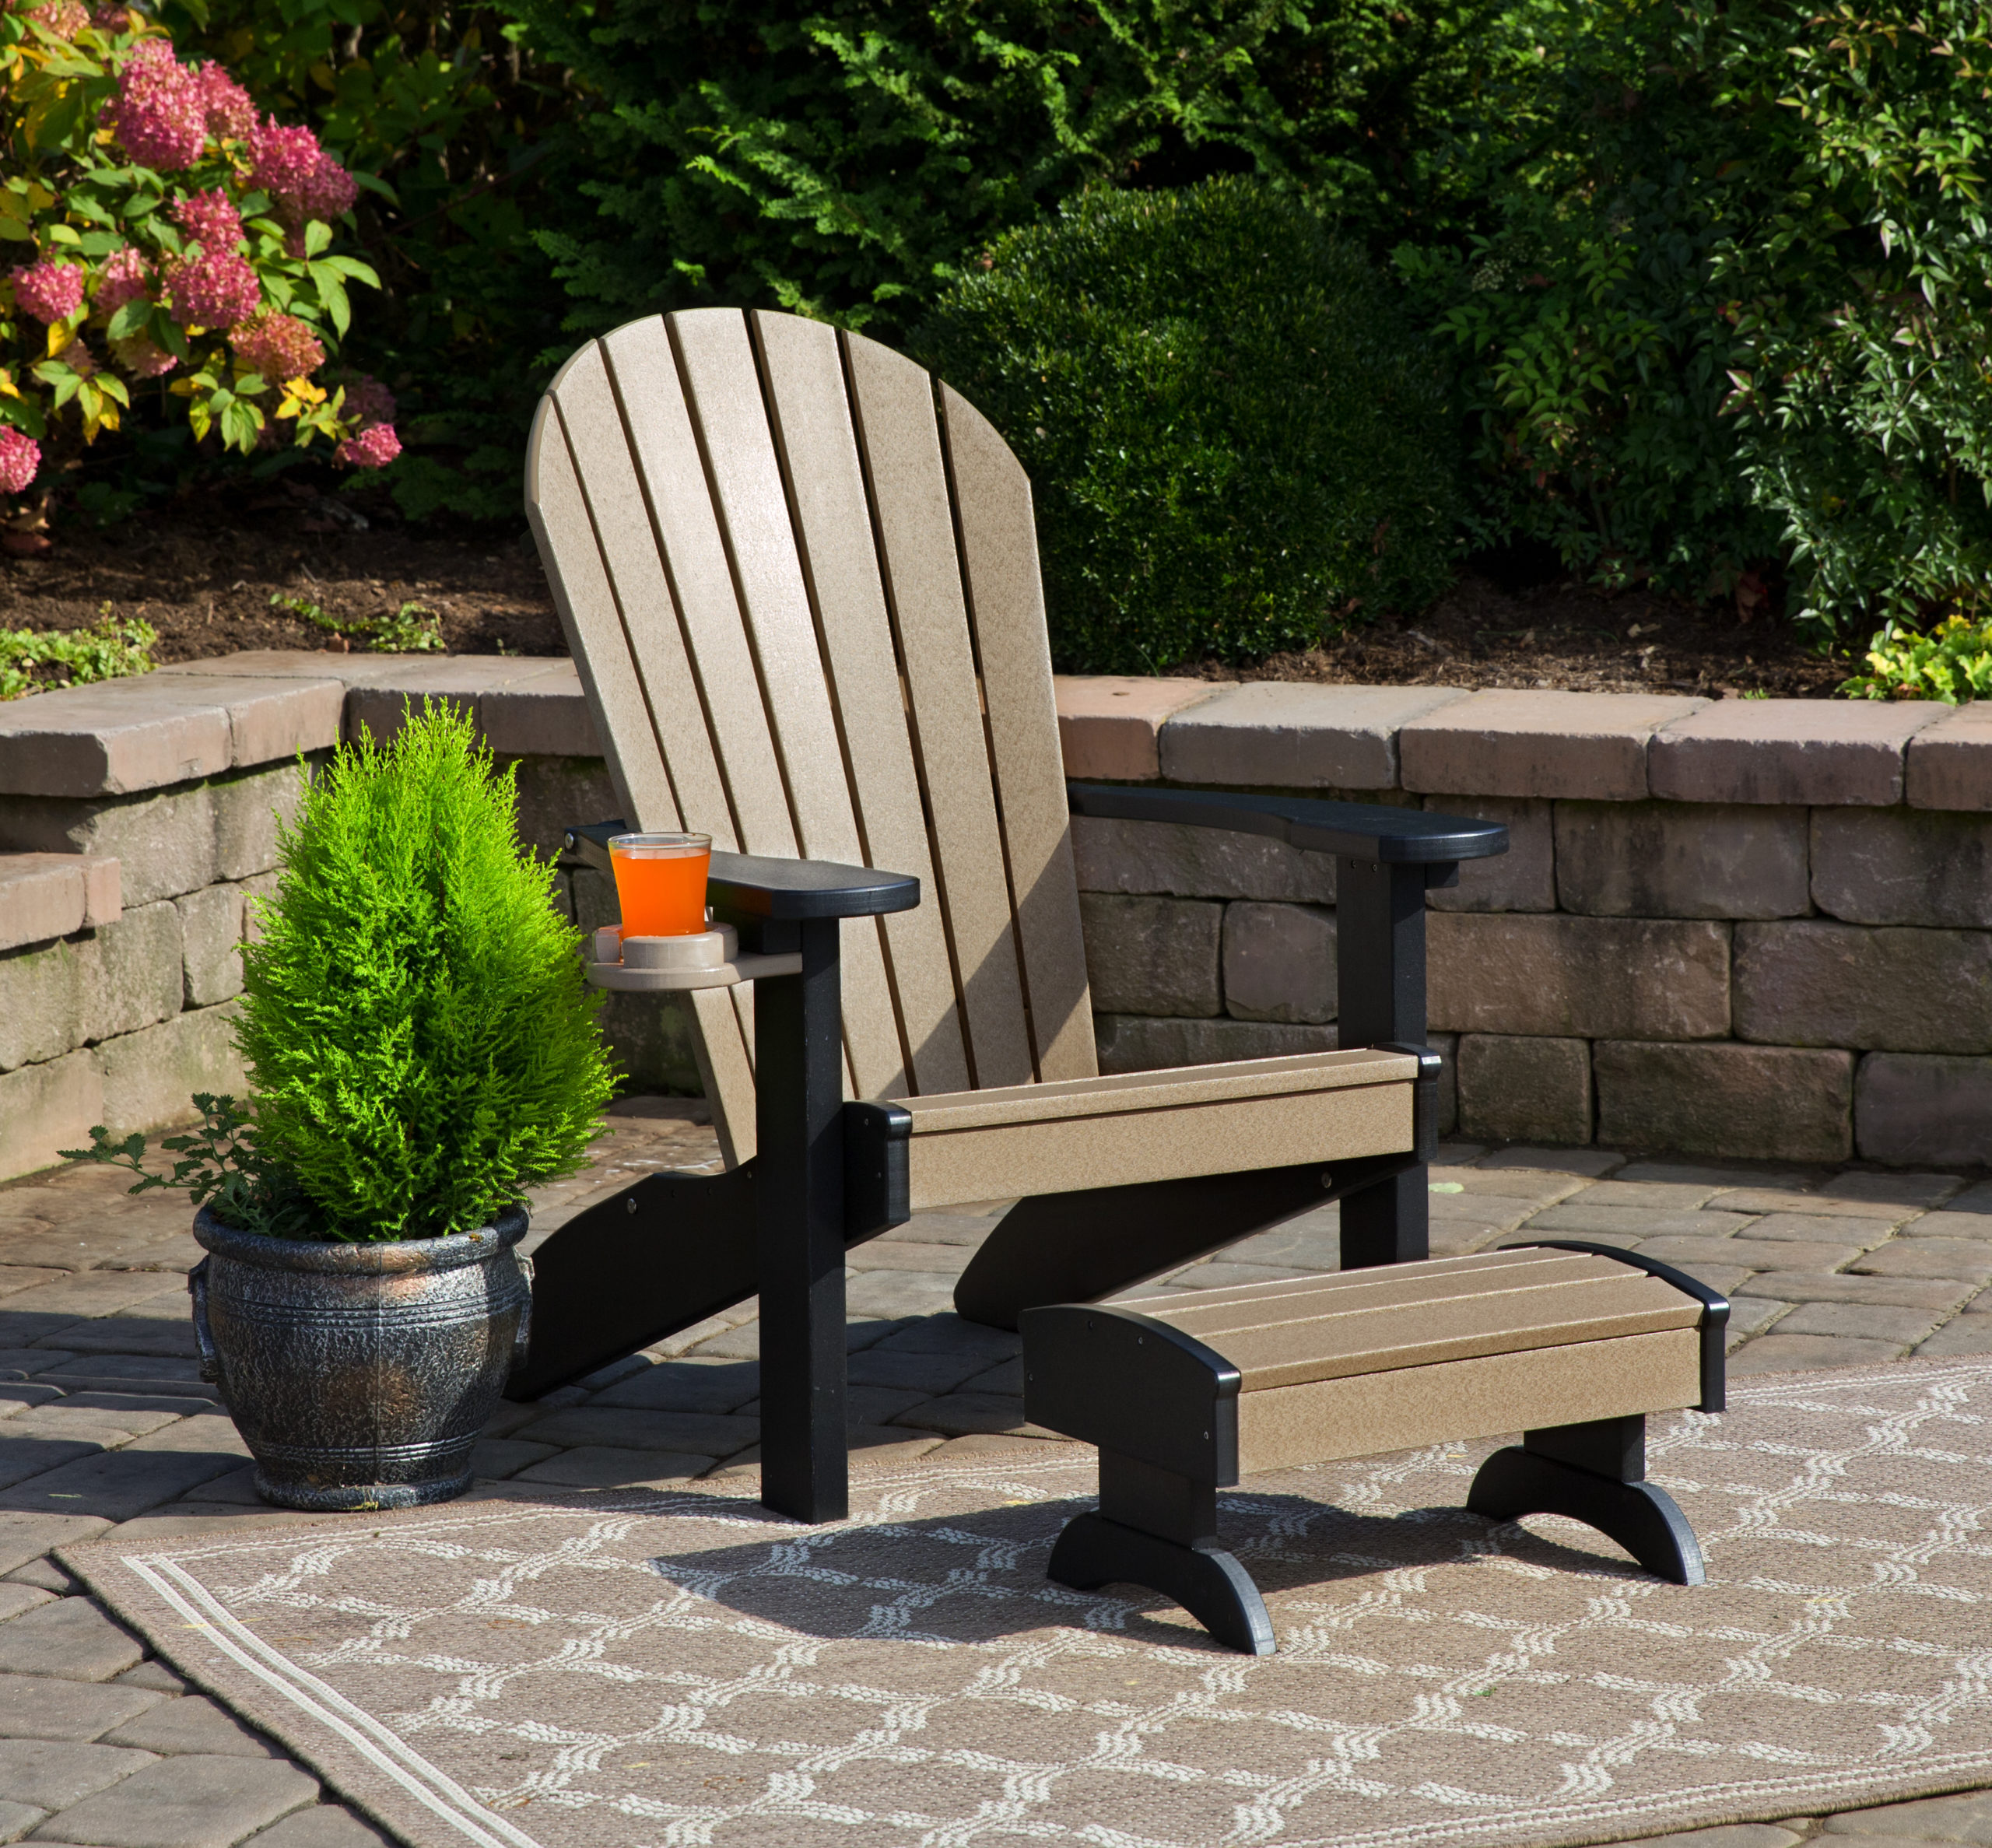 Weathered poly wood and black classic Adirondack chair set.